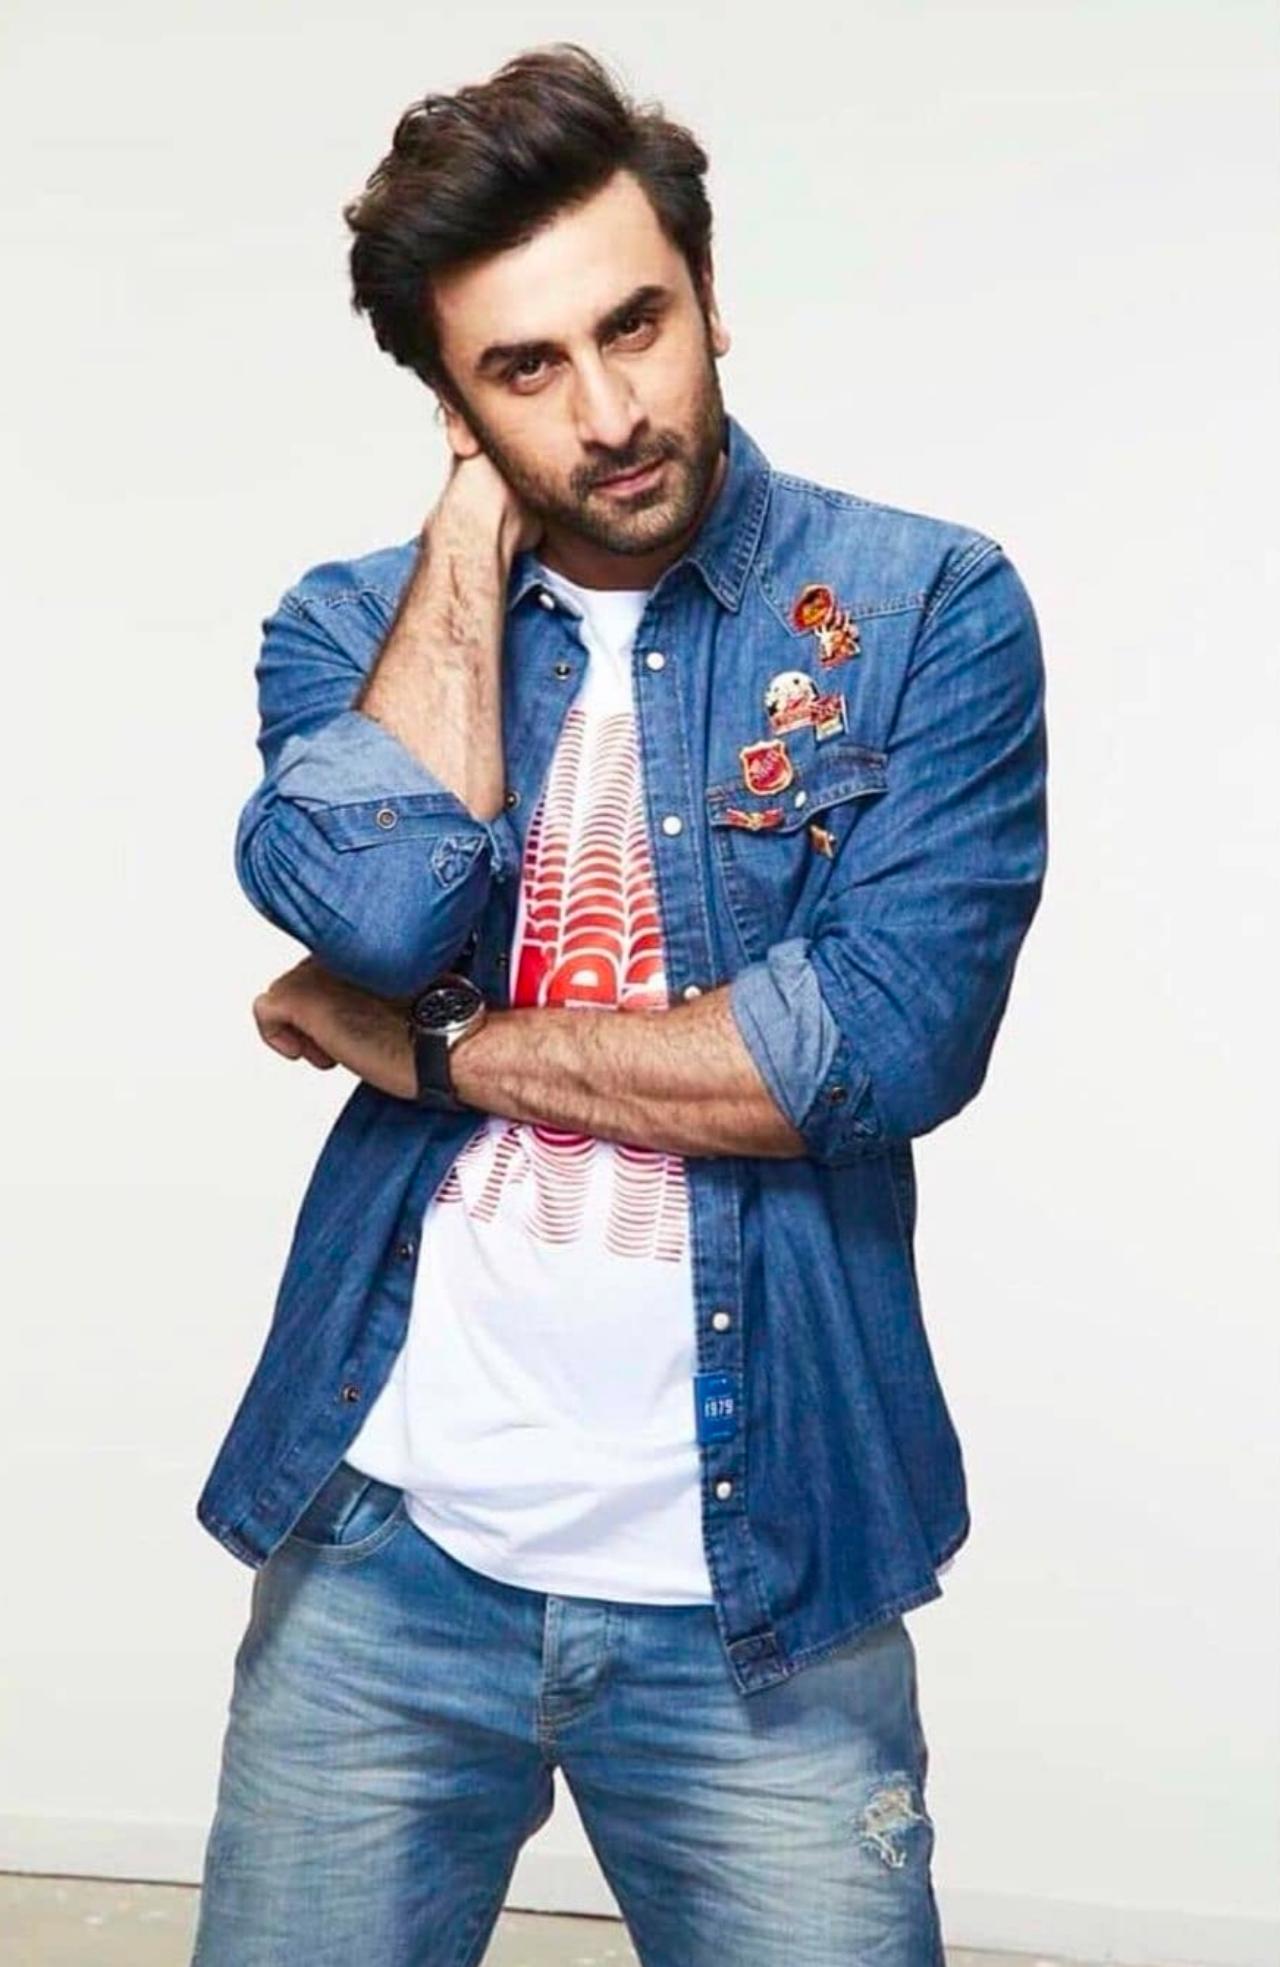 Ranbir Kapoor
Ranbir Kapoor’s love for football has been spoken about at length, not just by his fans but also by himself. He is the one who made the jersey number 8 cooler and football as a sport hotter. The actor has played many friendly matches for his team, All Stars Football Club, also known as ASFC. His love for football has been since his childhood and he was also a part of the school football team